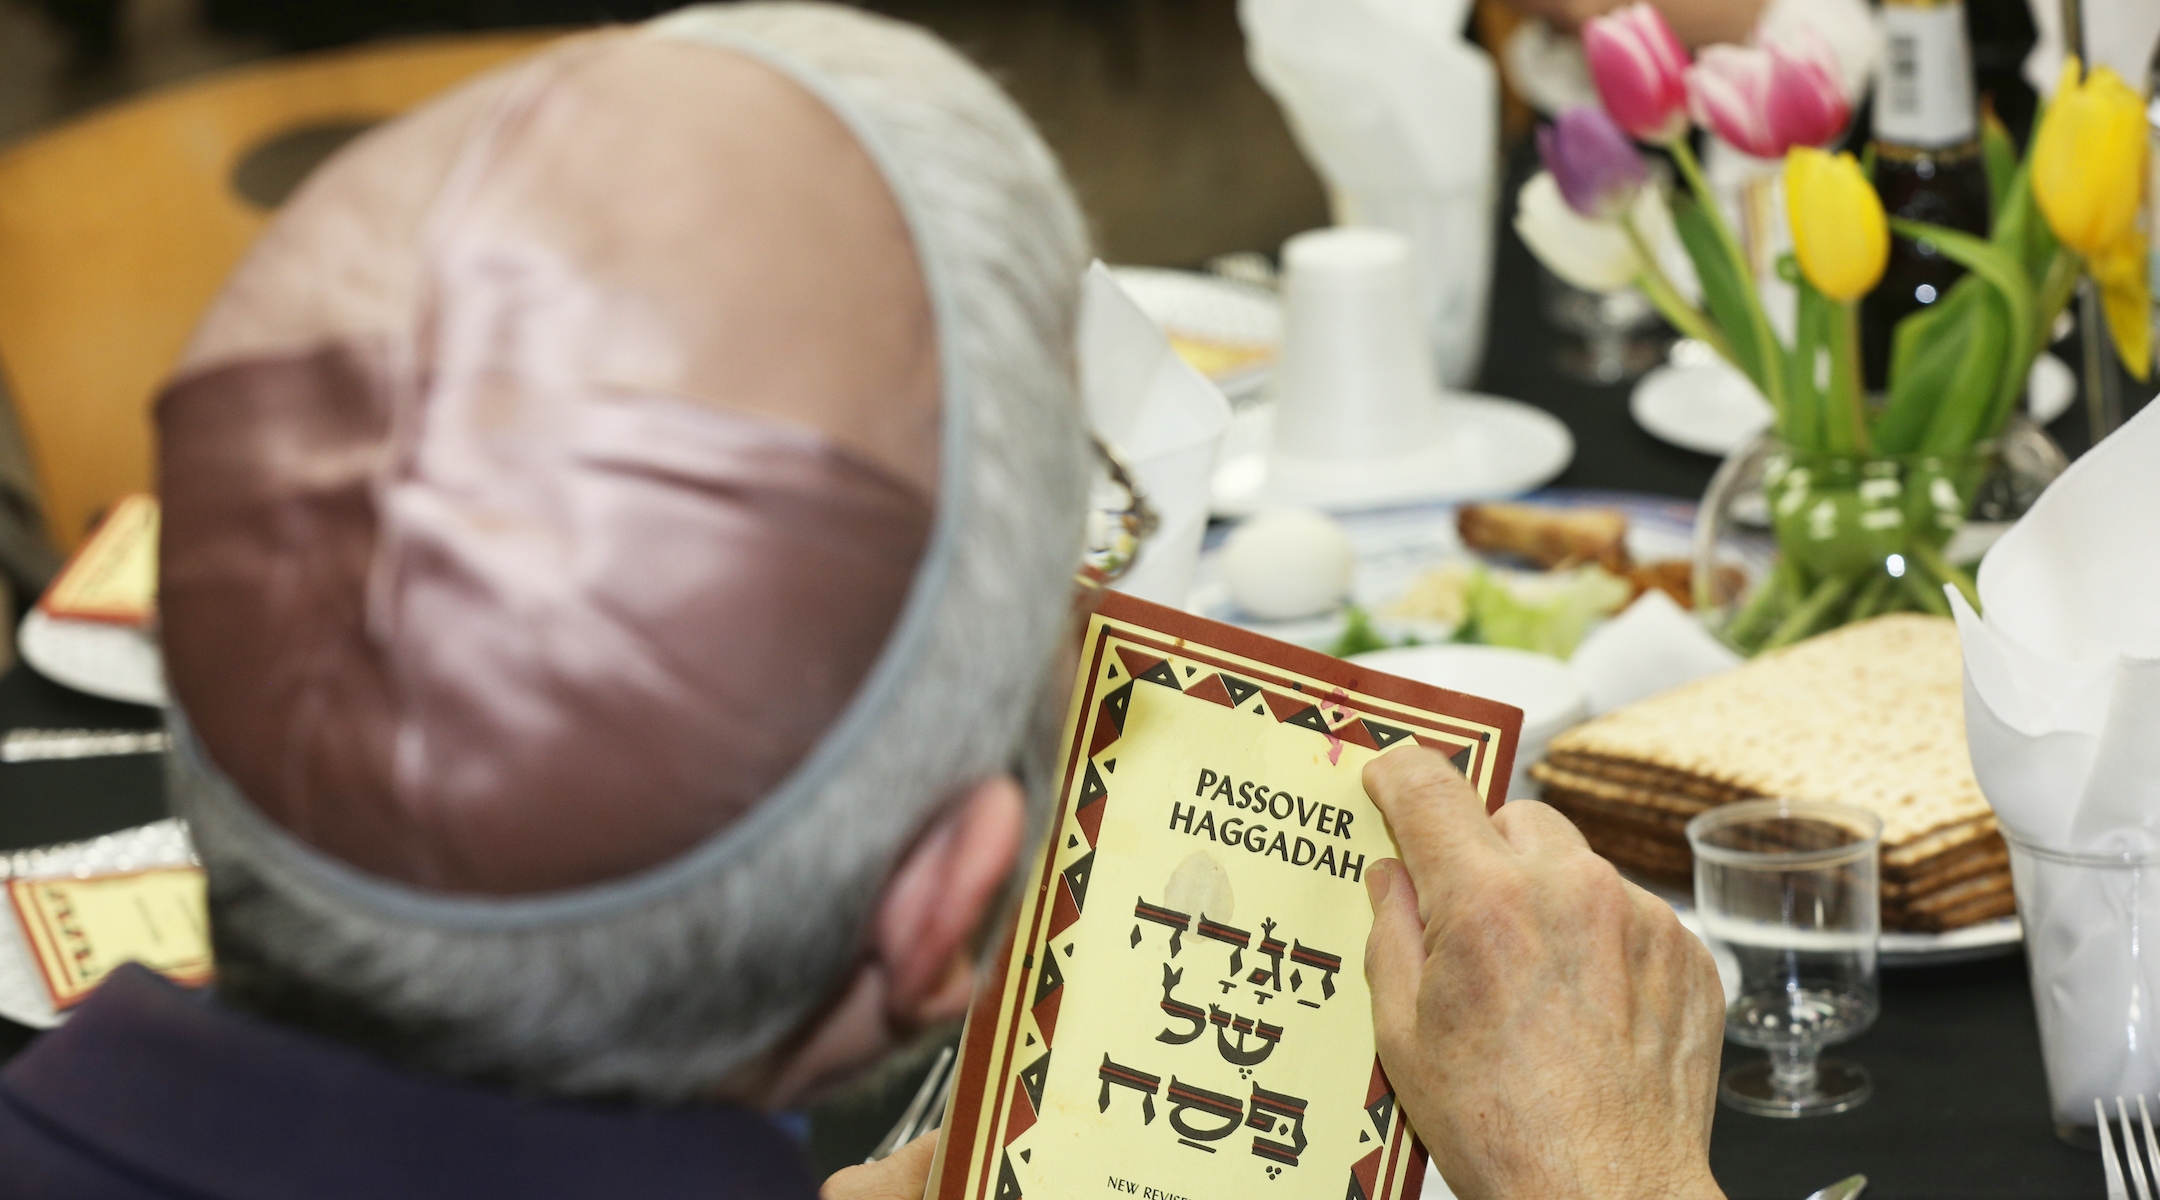 A Jewish man reads the Passover Haggadah during a seder in North York, Ontario, Canada on April 19, 2019. (Creative Touch Imaging Ltd./NurPhoto via Getty Images)